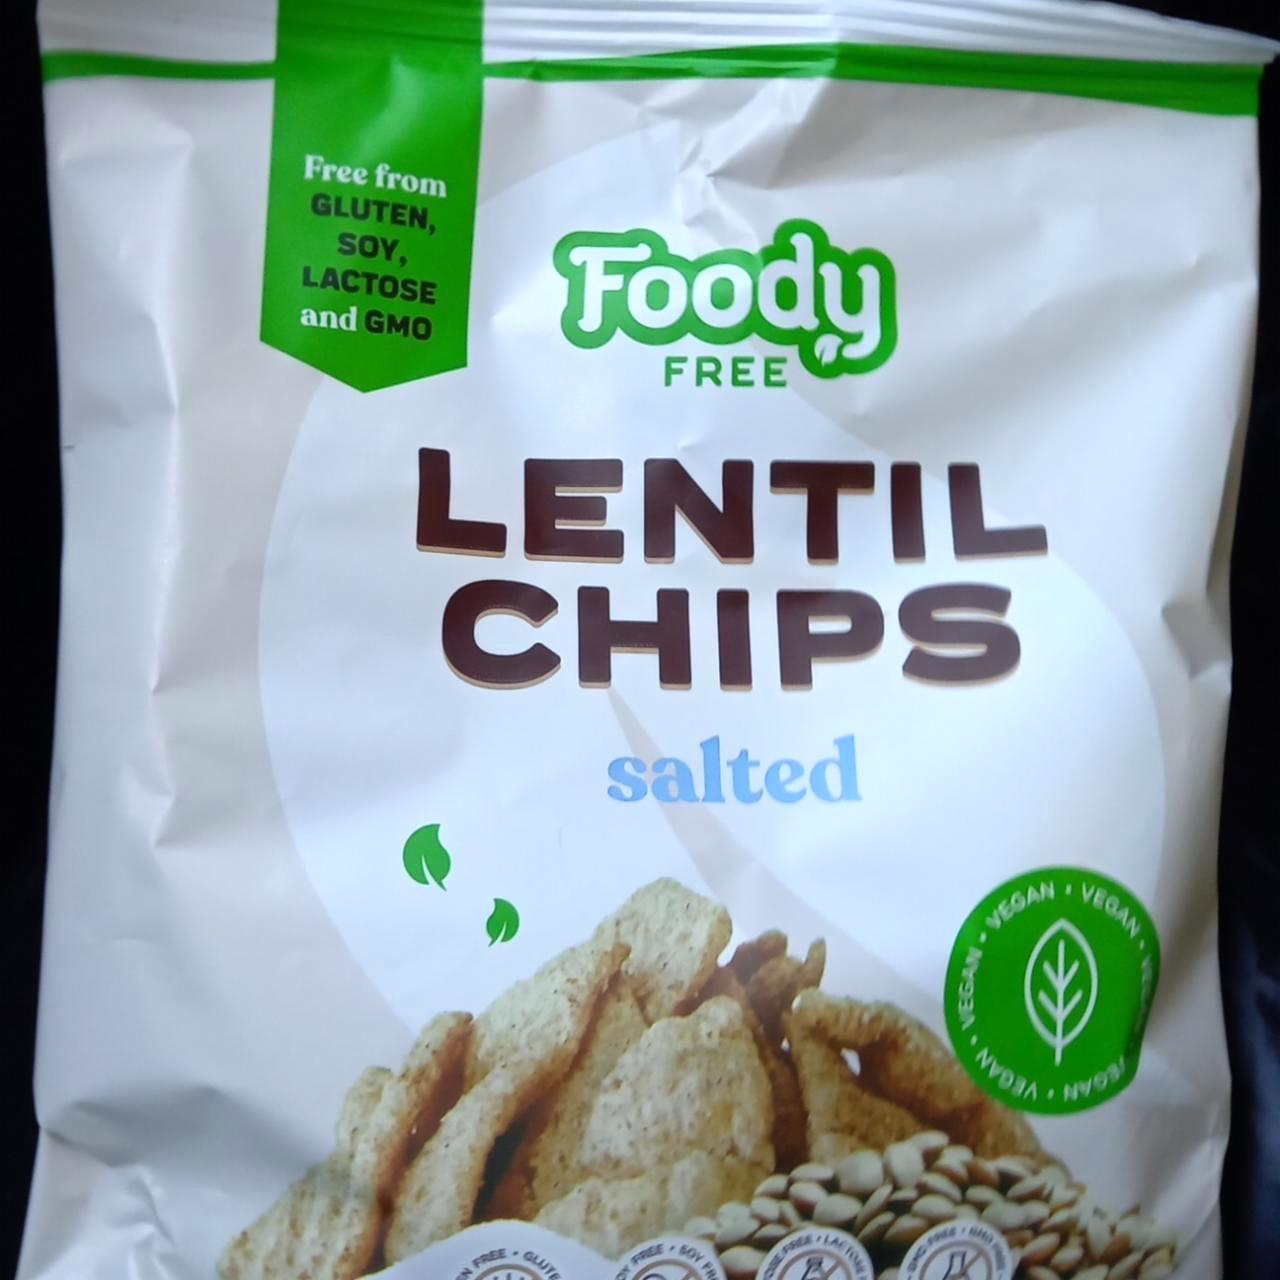 Képek - Lencse chips Salted Foody free